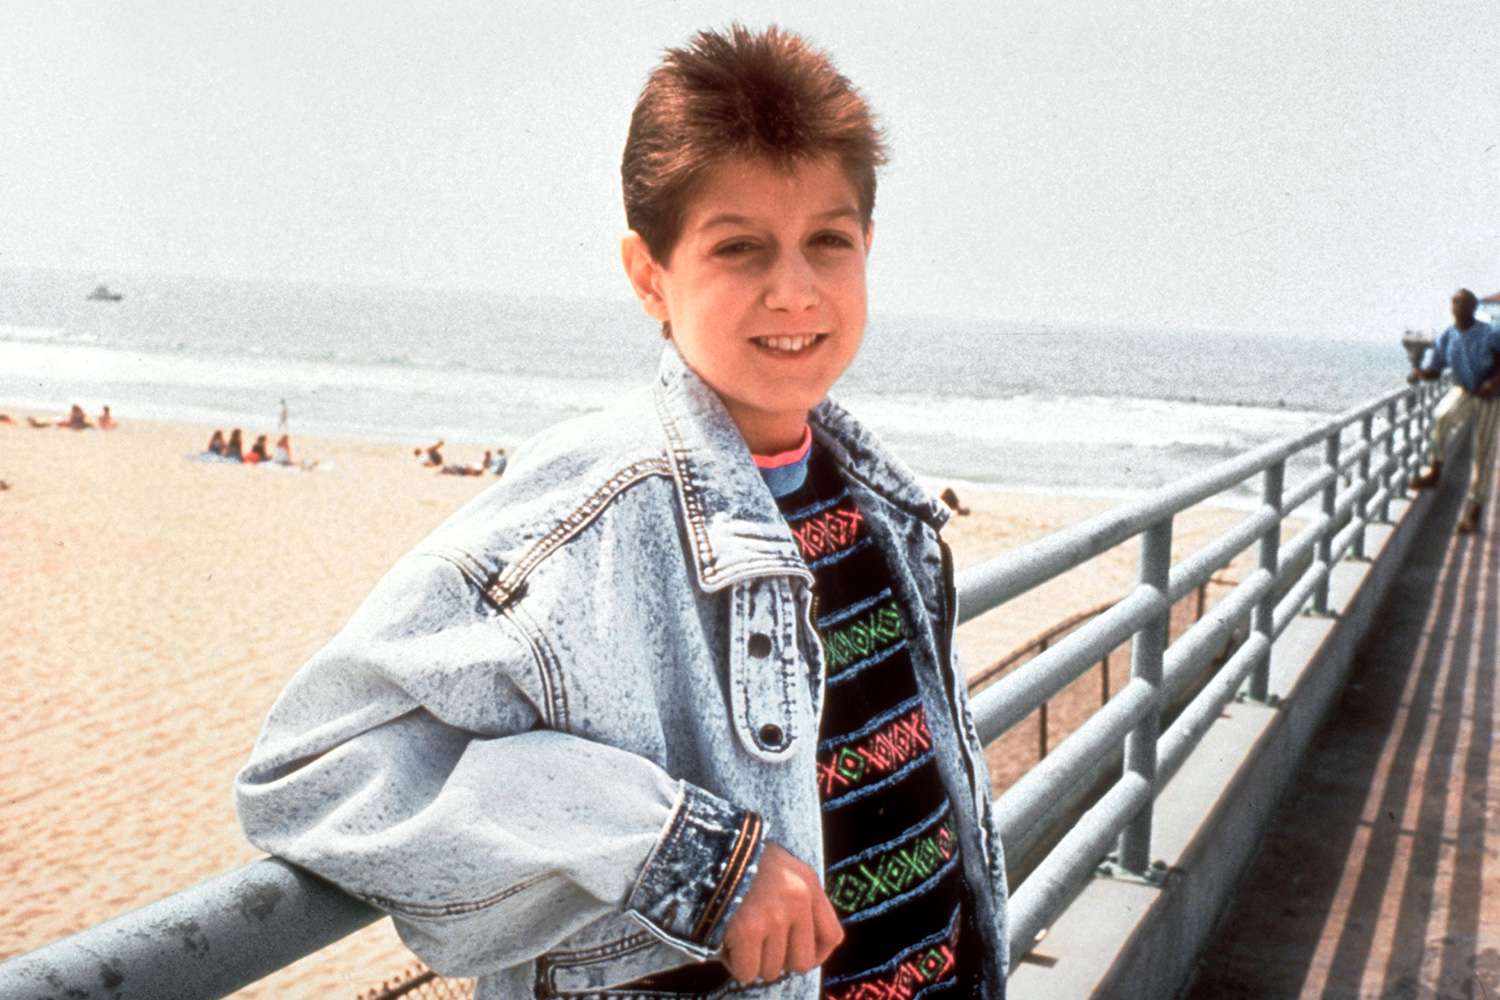 Ryan White, Who Died of AIDS at 18, Would Have Turned 50 Today: 'He Made the World Better' - Yahoo Entertainment